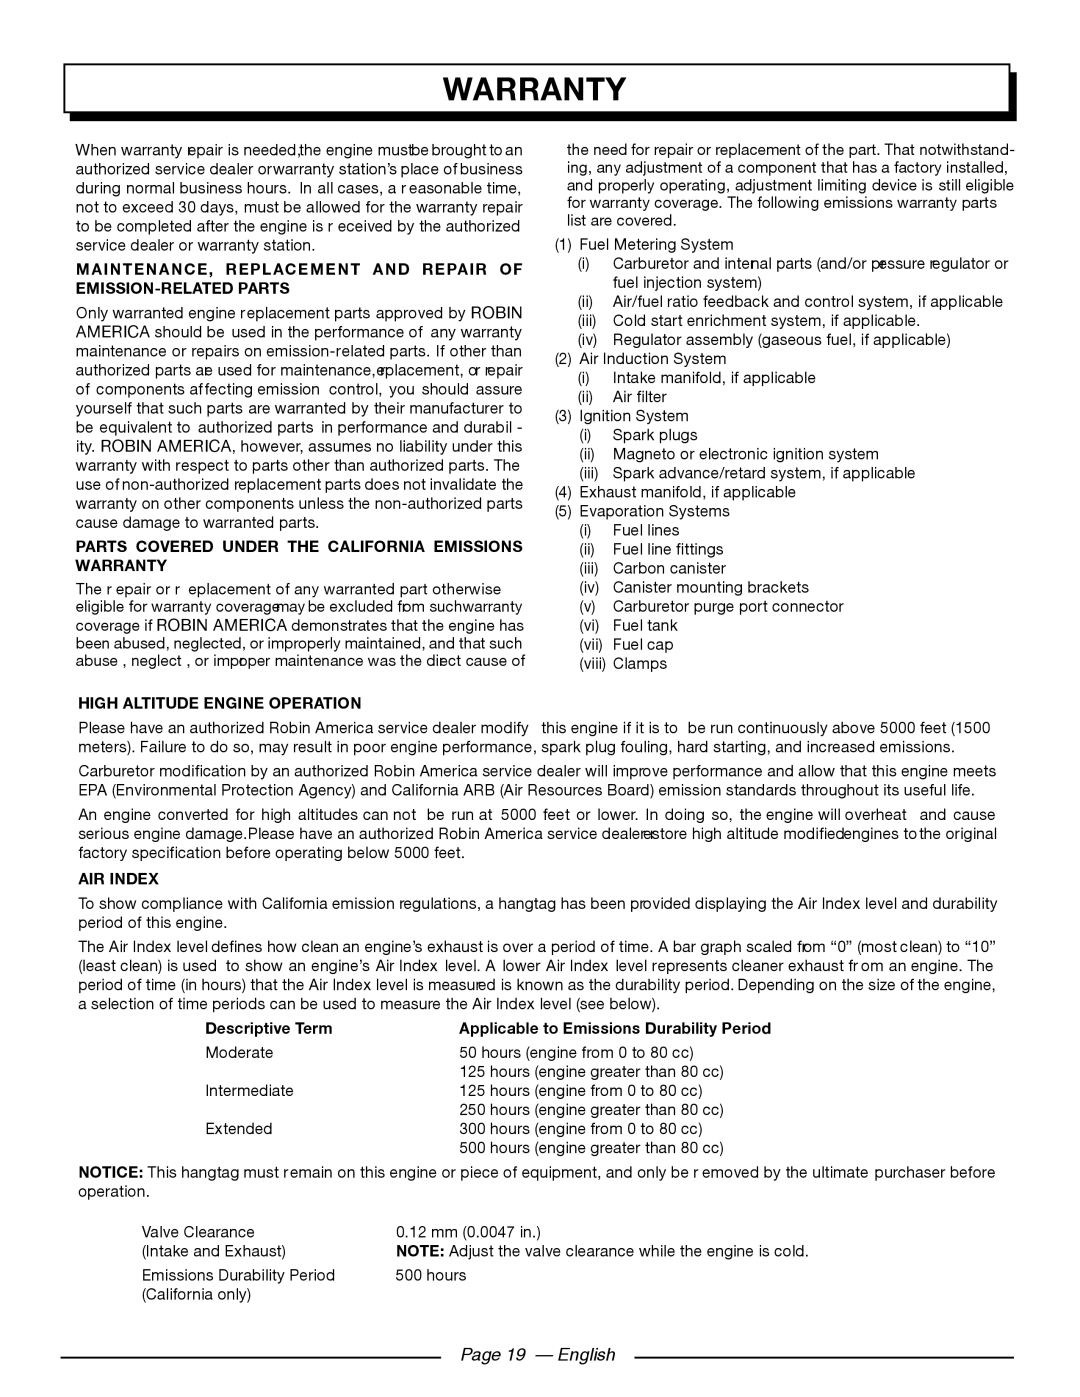 Homelite UT80709 Warranty, Page 19 - English, Maintenance, Replacement And Repair Of Emission-Related Parts, Air Index 